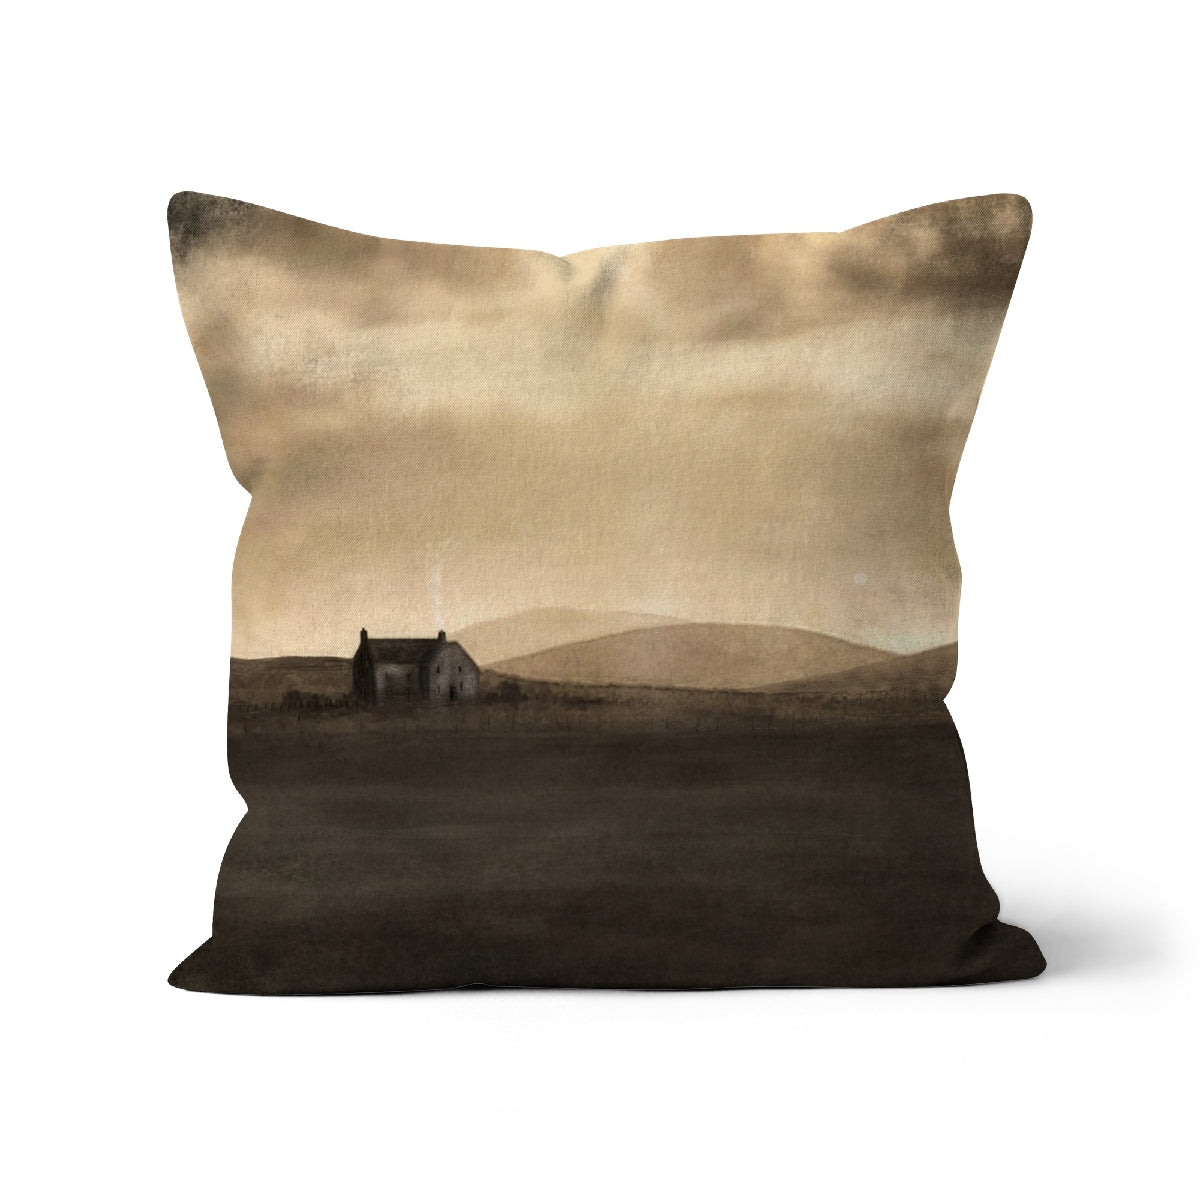 A Moonlit Croft Art Gifts Cushion-Cushions-Hebridean Islands Art Gallery-Faux Suede-22"x22"-Paintings, Prints, Homeware, Art Gifts From Scotland By Scottish Artist Kevin Hunter